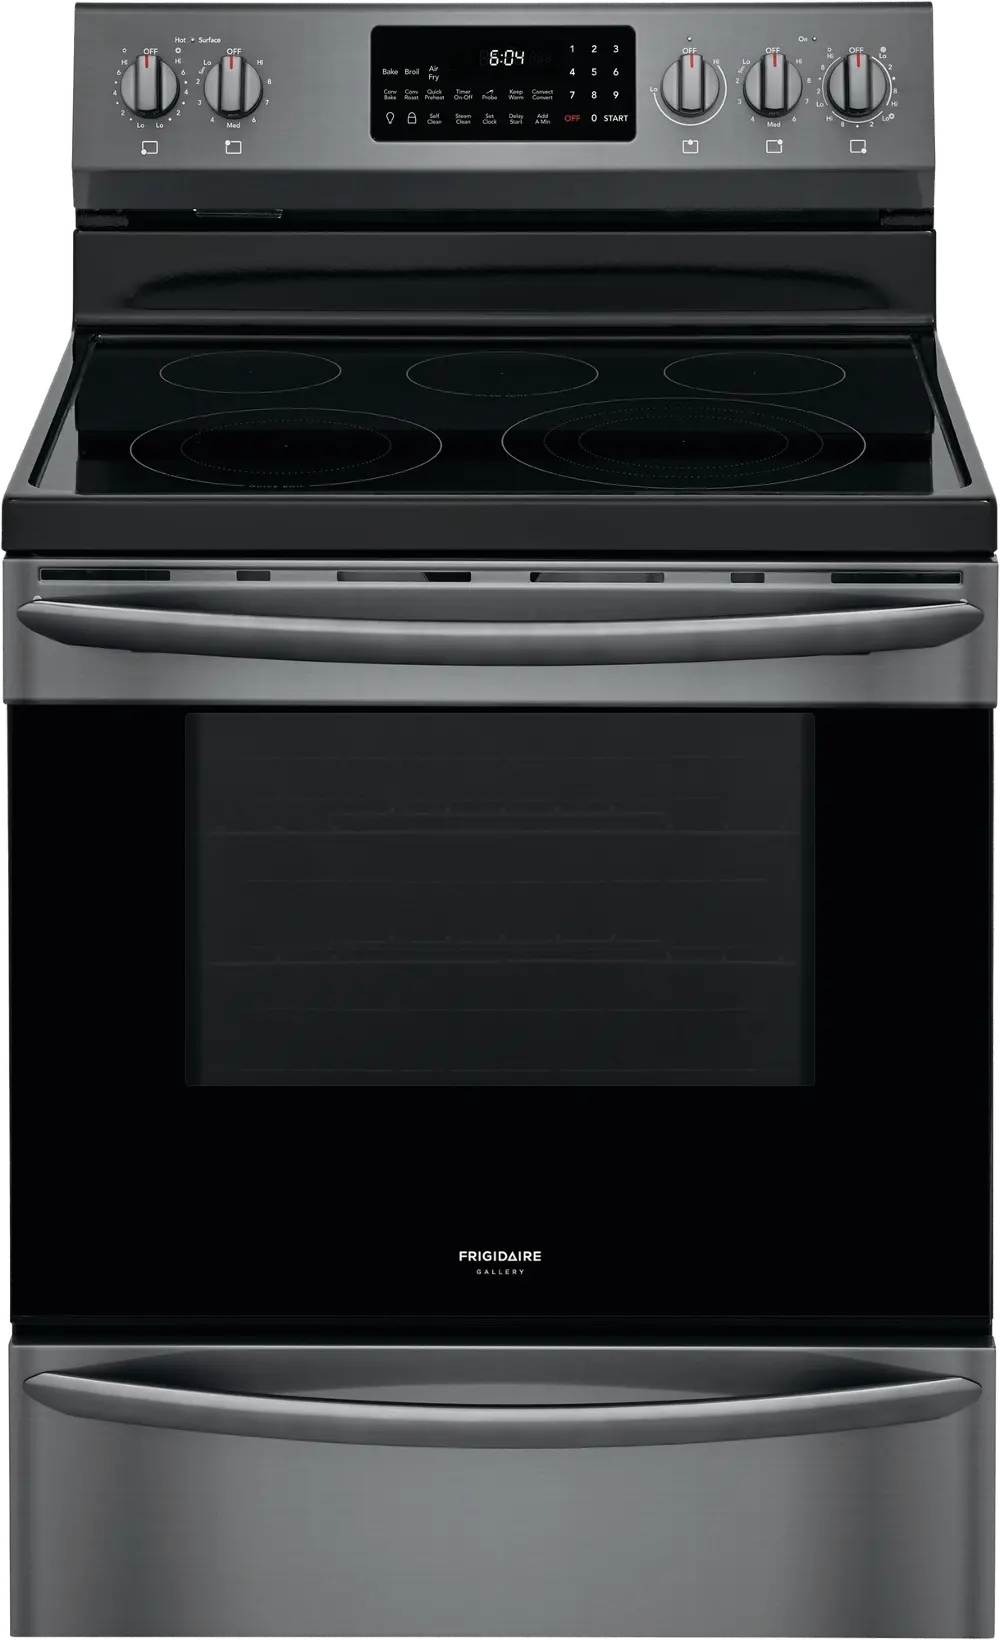 GCRE3060AD Frigidaire Gallery 5.7 cu ft Electric Range - Black Stainless Steel-1